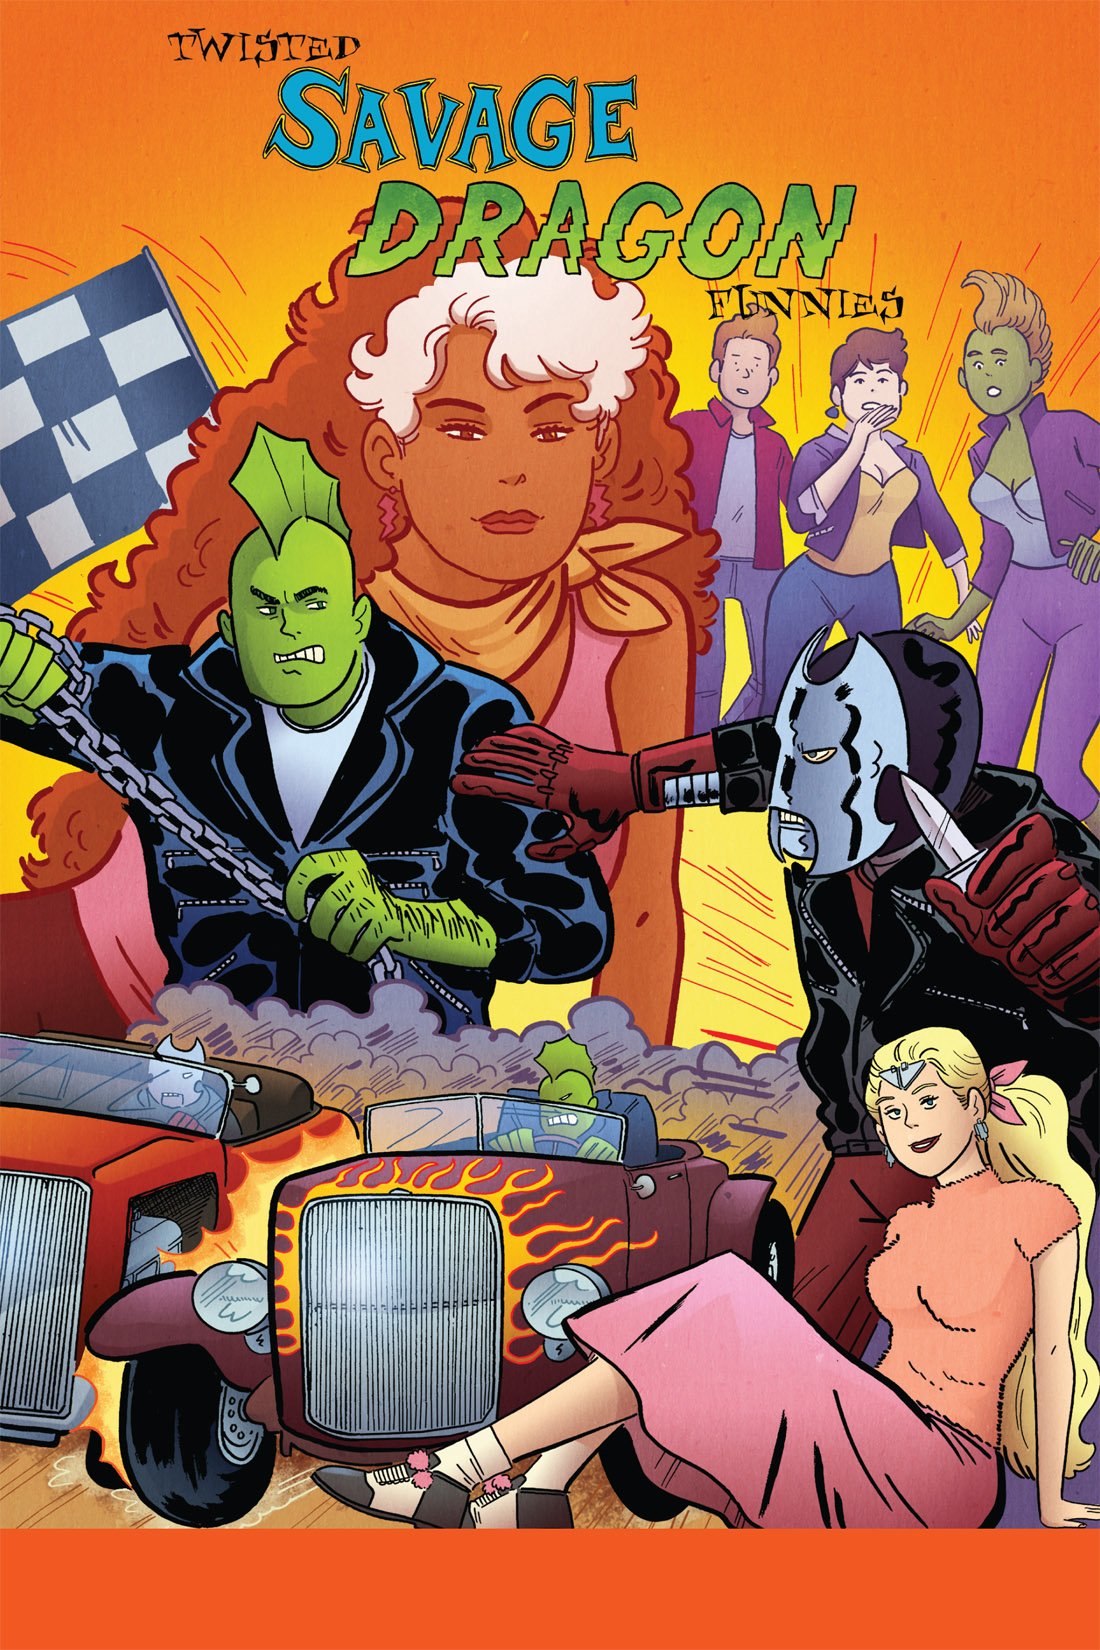 Read online Twisted Savage Dragon Funnies comic -  Issue # TPB - 36